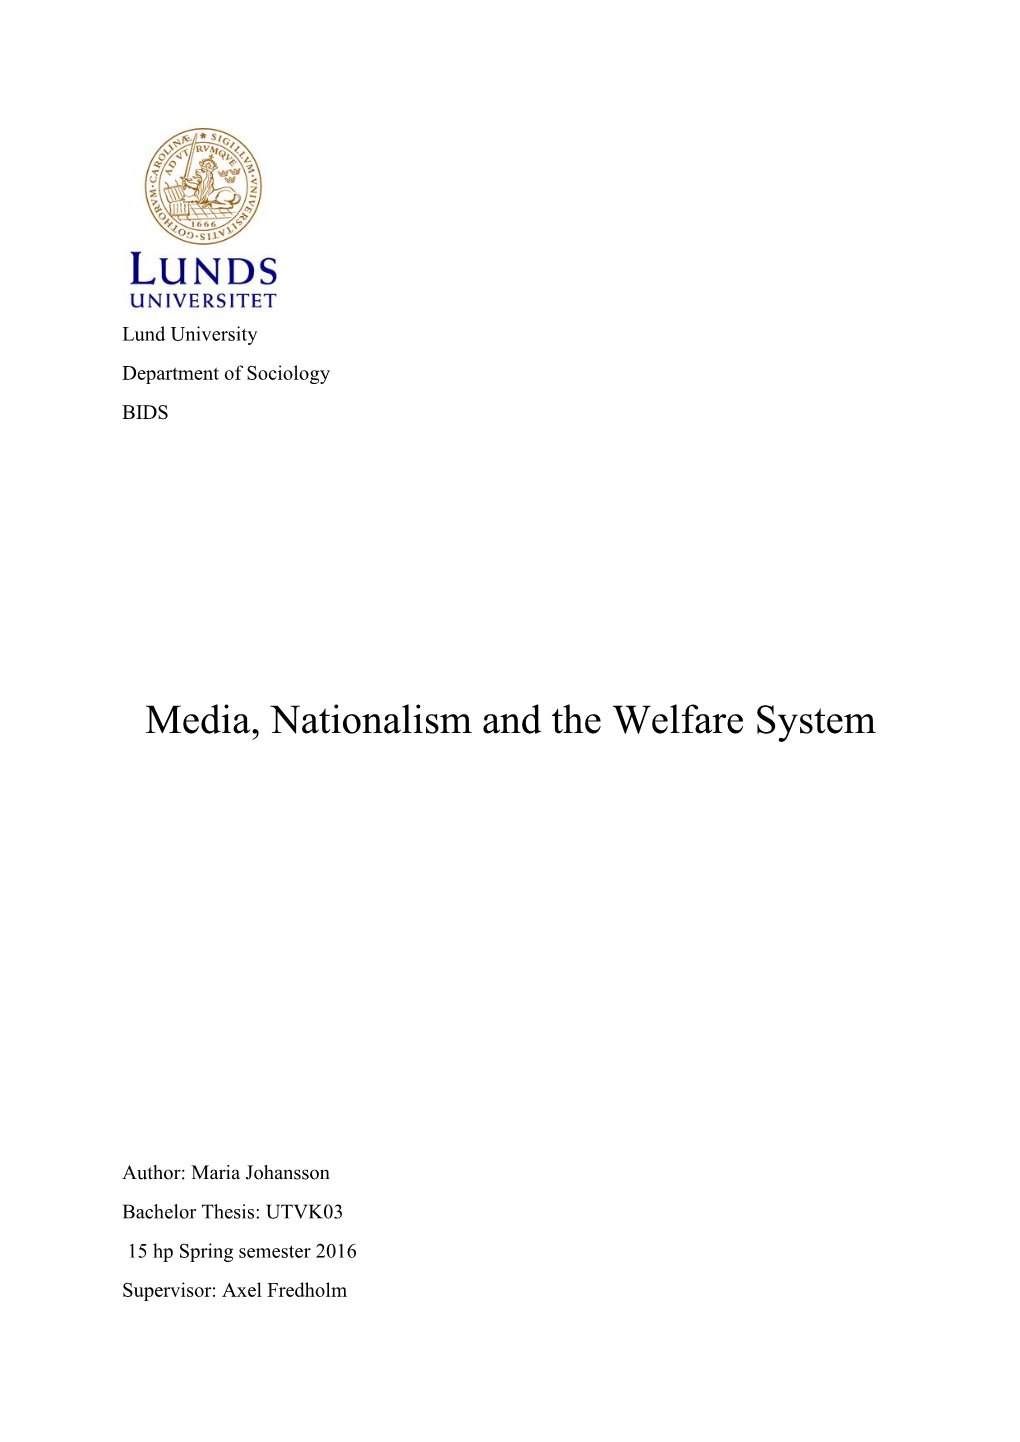 Media, Nationalism and the Welfare System